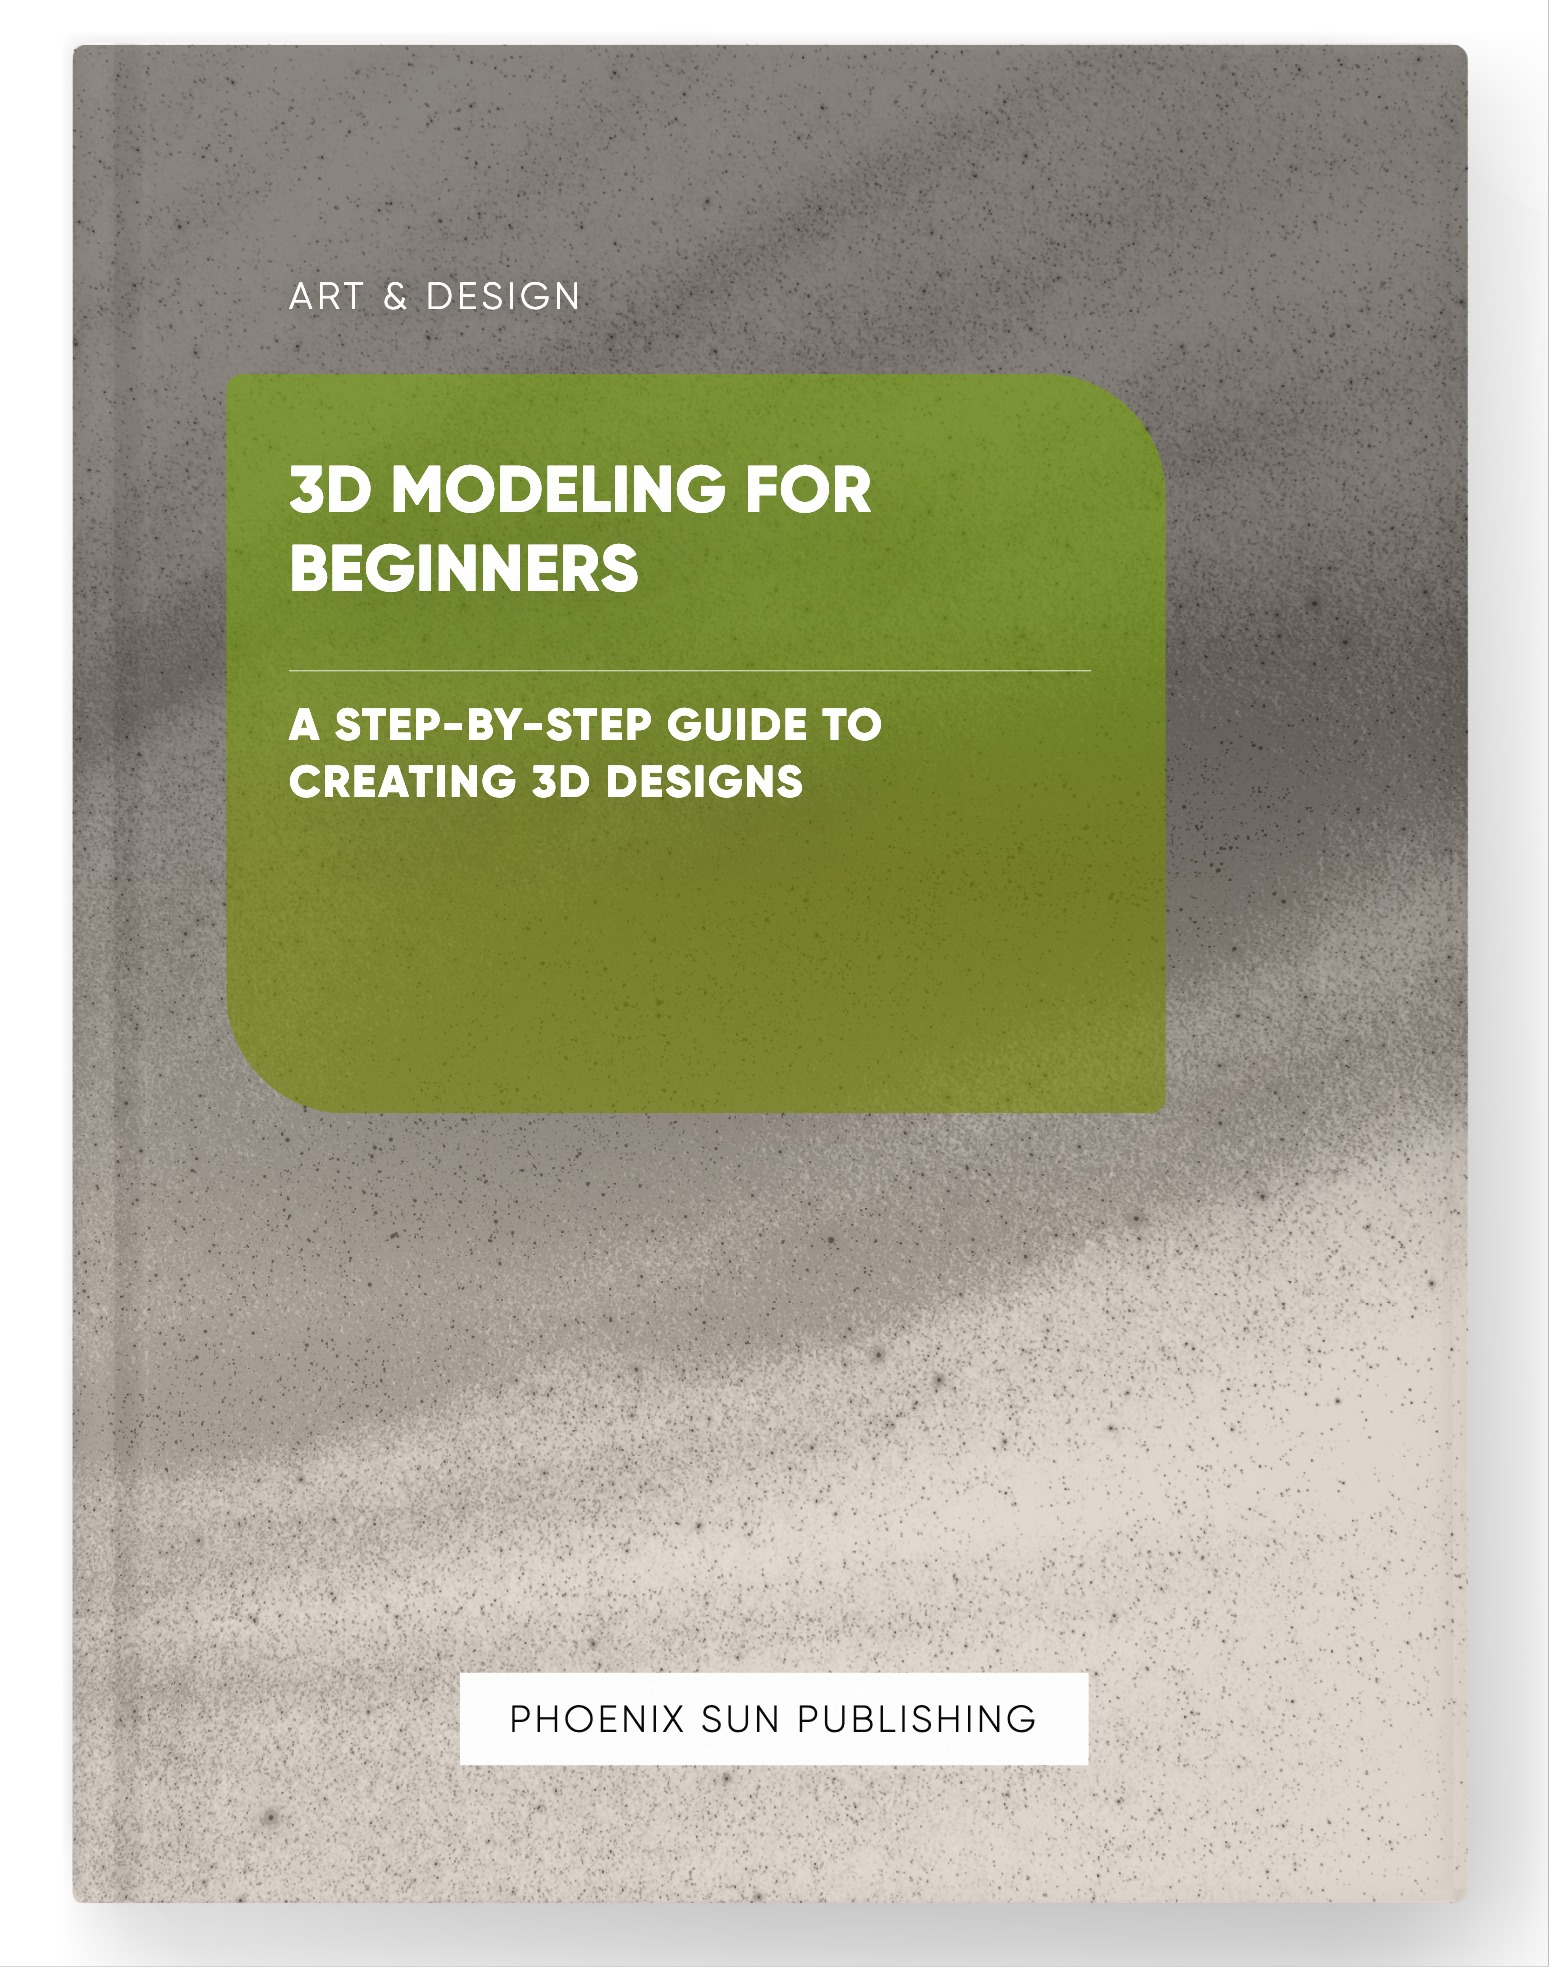 3D Modeling for Beginners – A Step-by-Step Guide to Creating 3D Designs